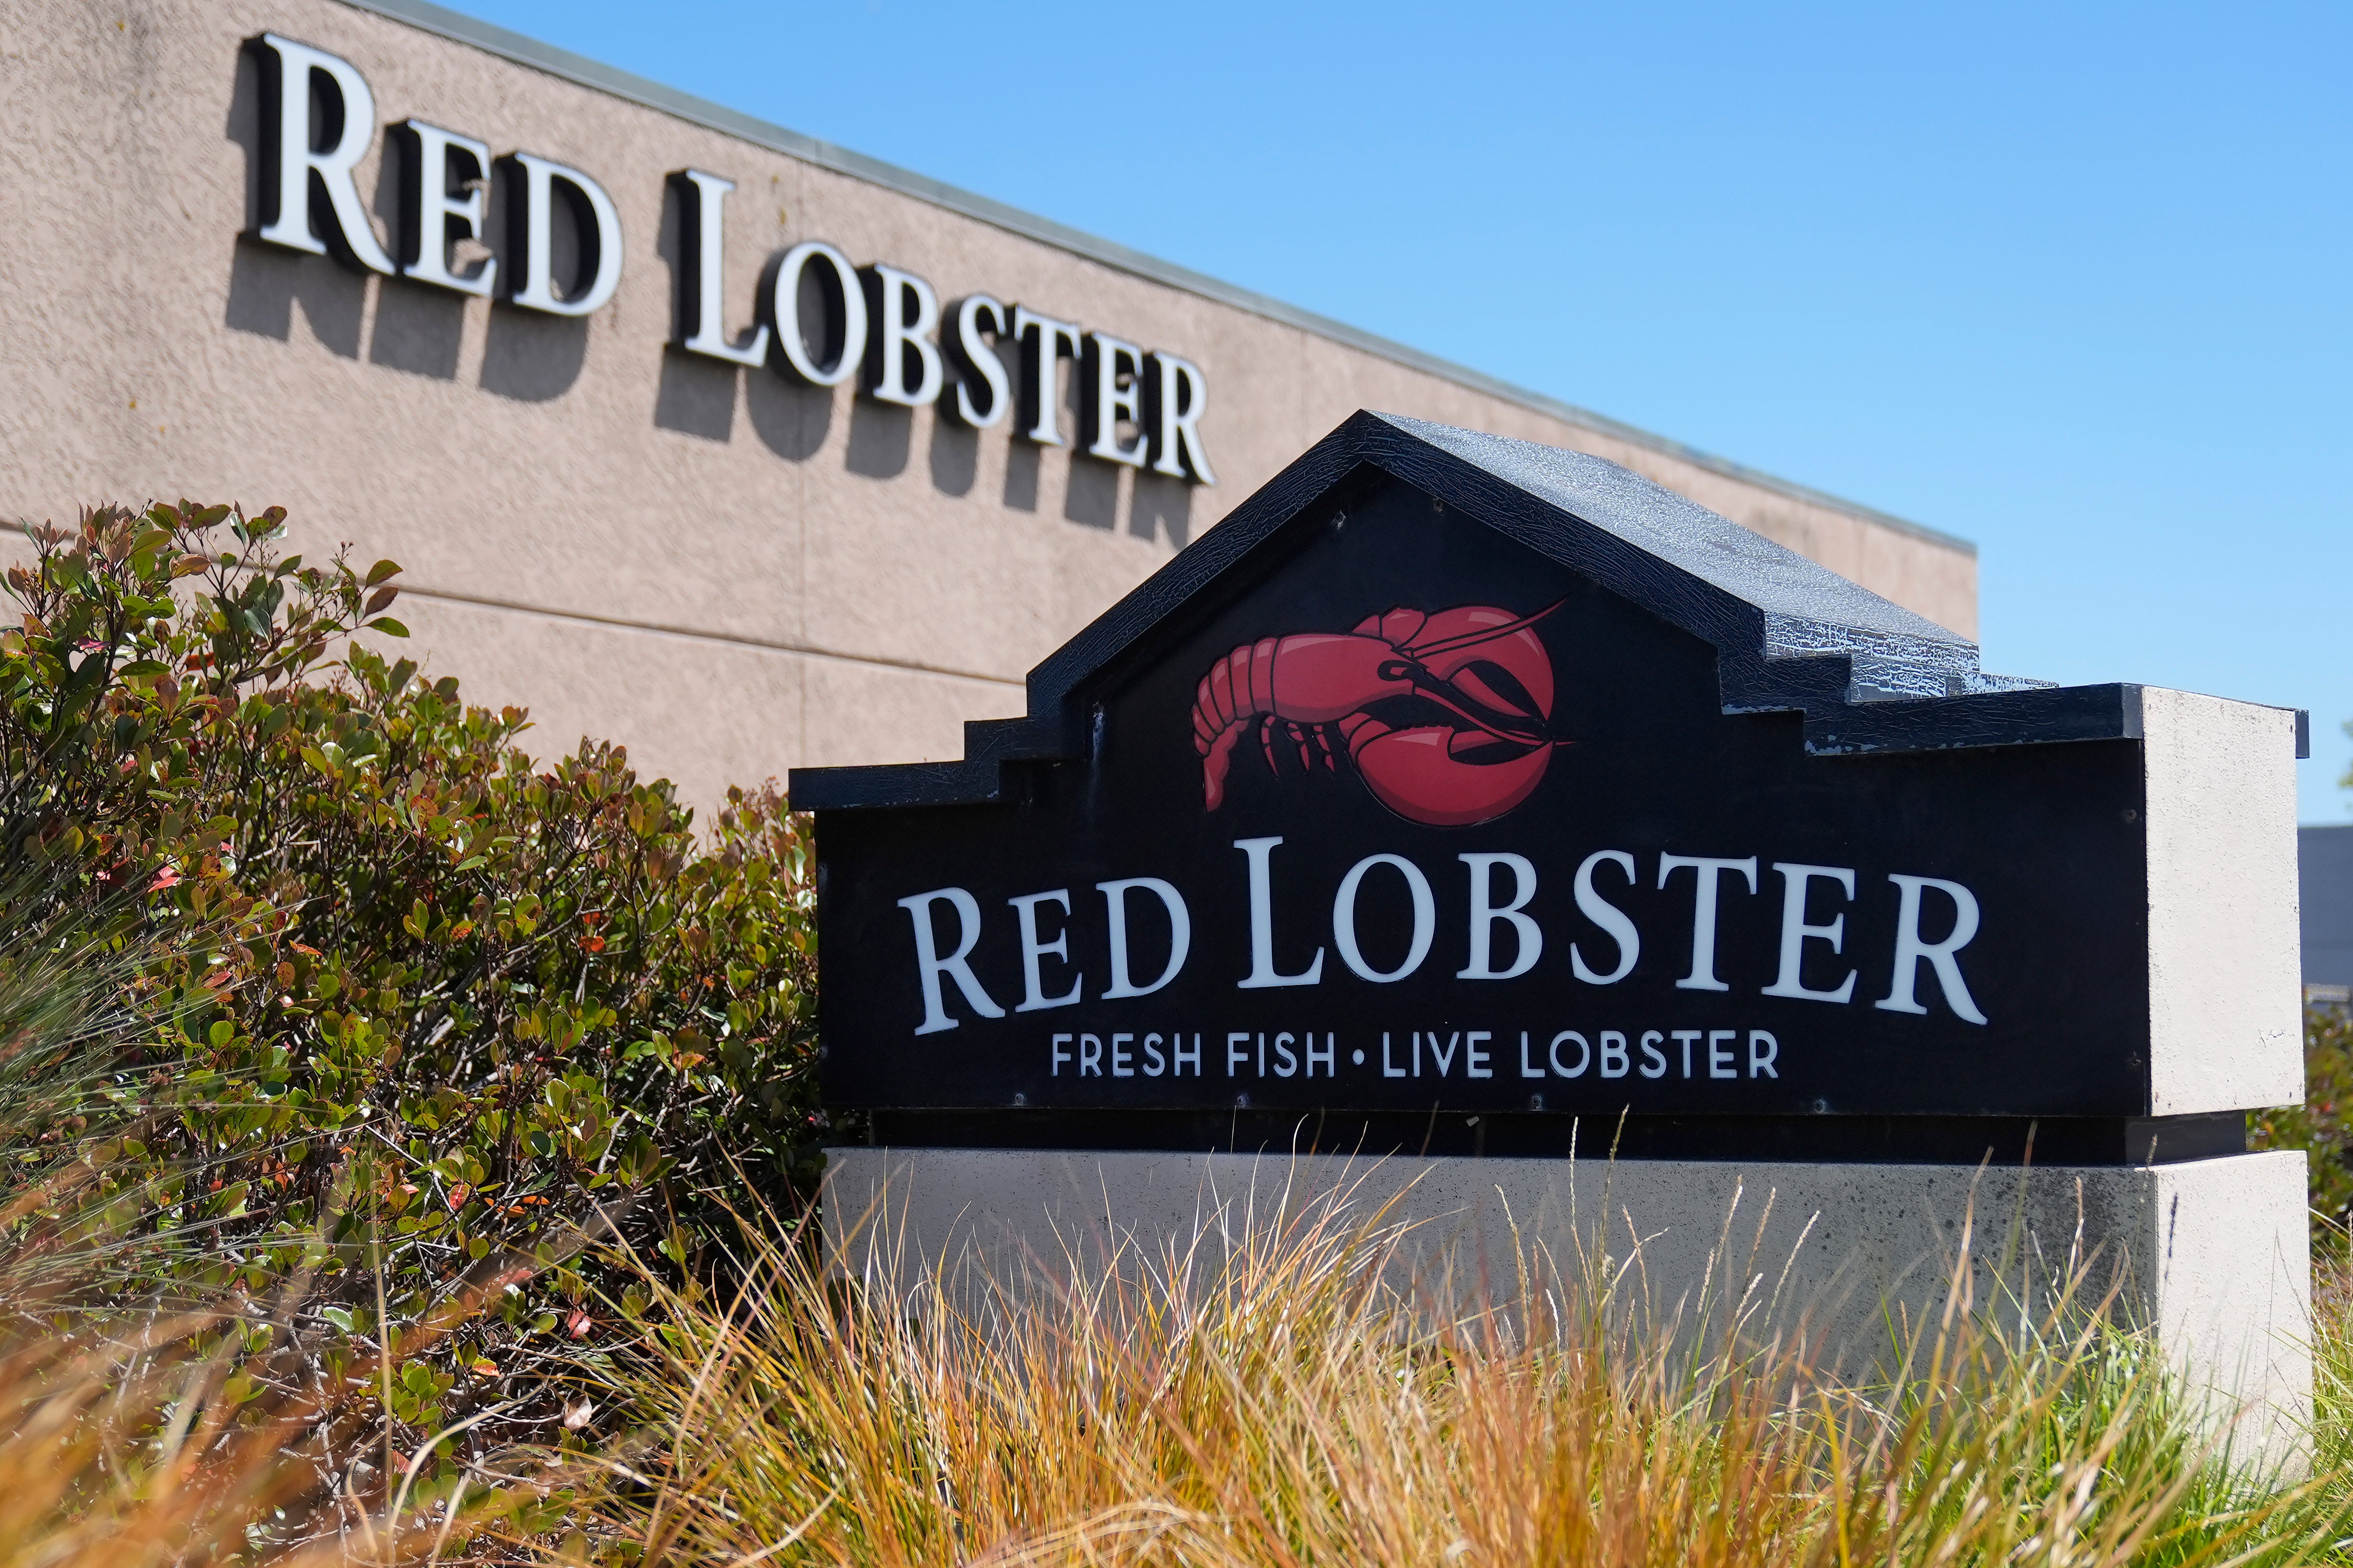 A former employee is suing Red Lobster for allegedly firing her without proper warning (stock image)